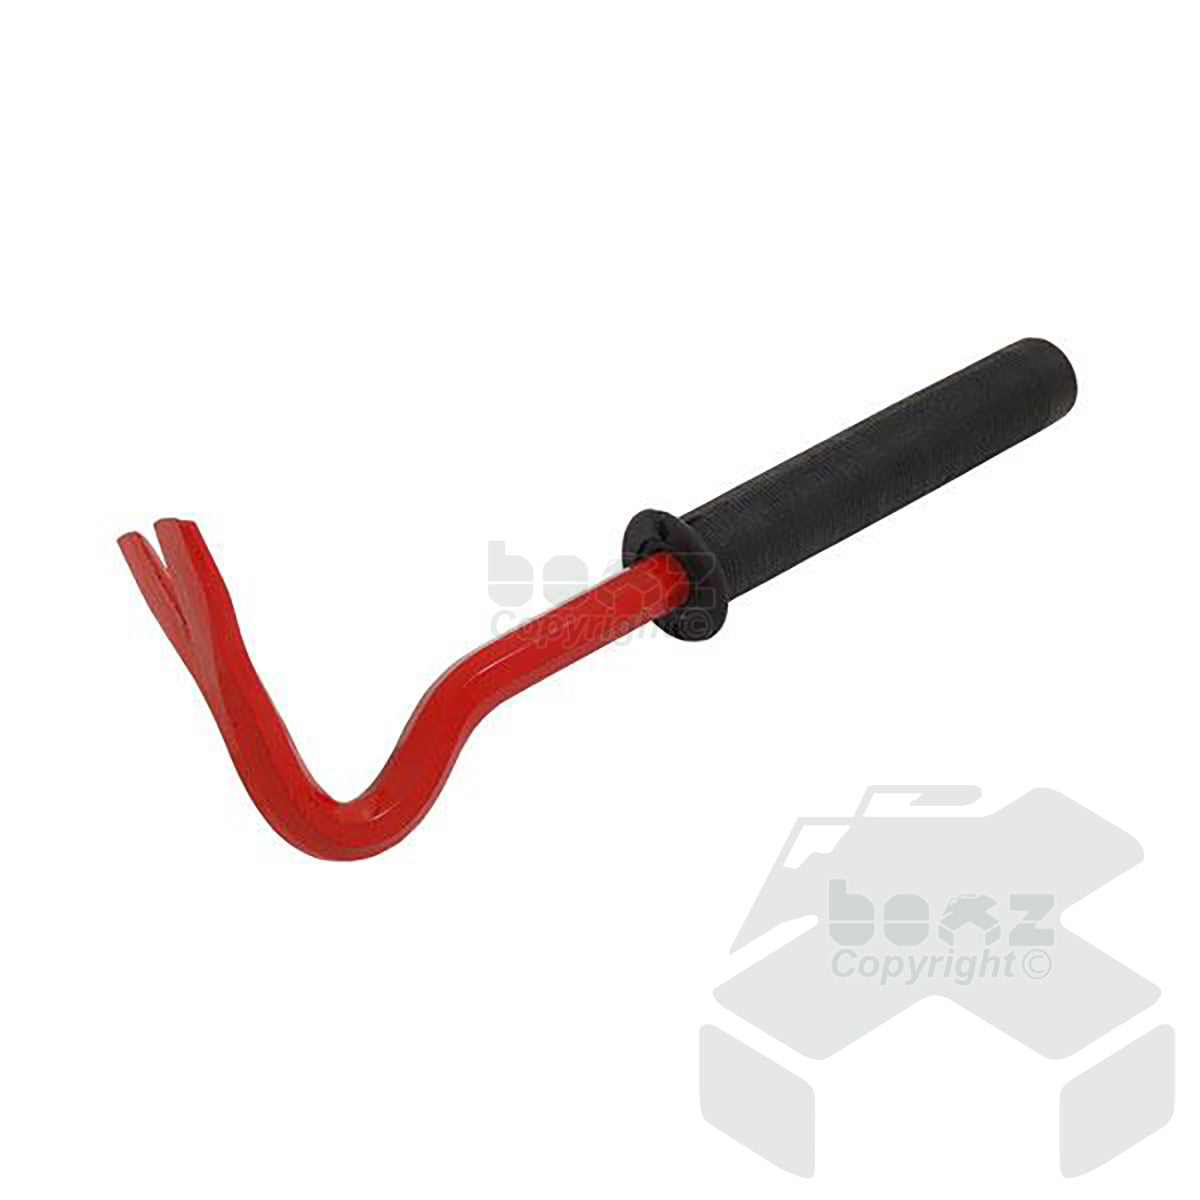 Neilsen Nail Puller 12ins With Grip